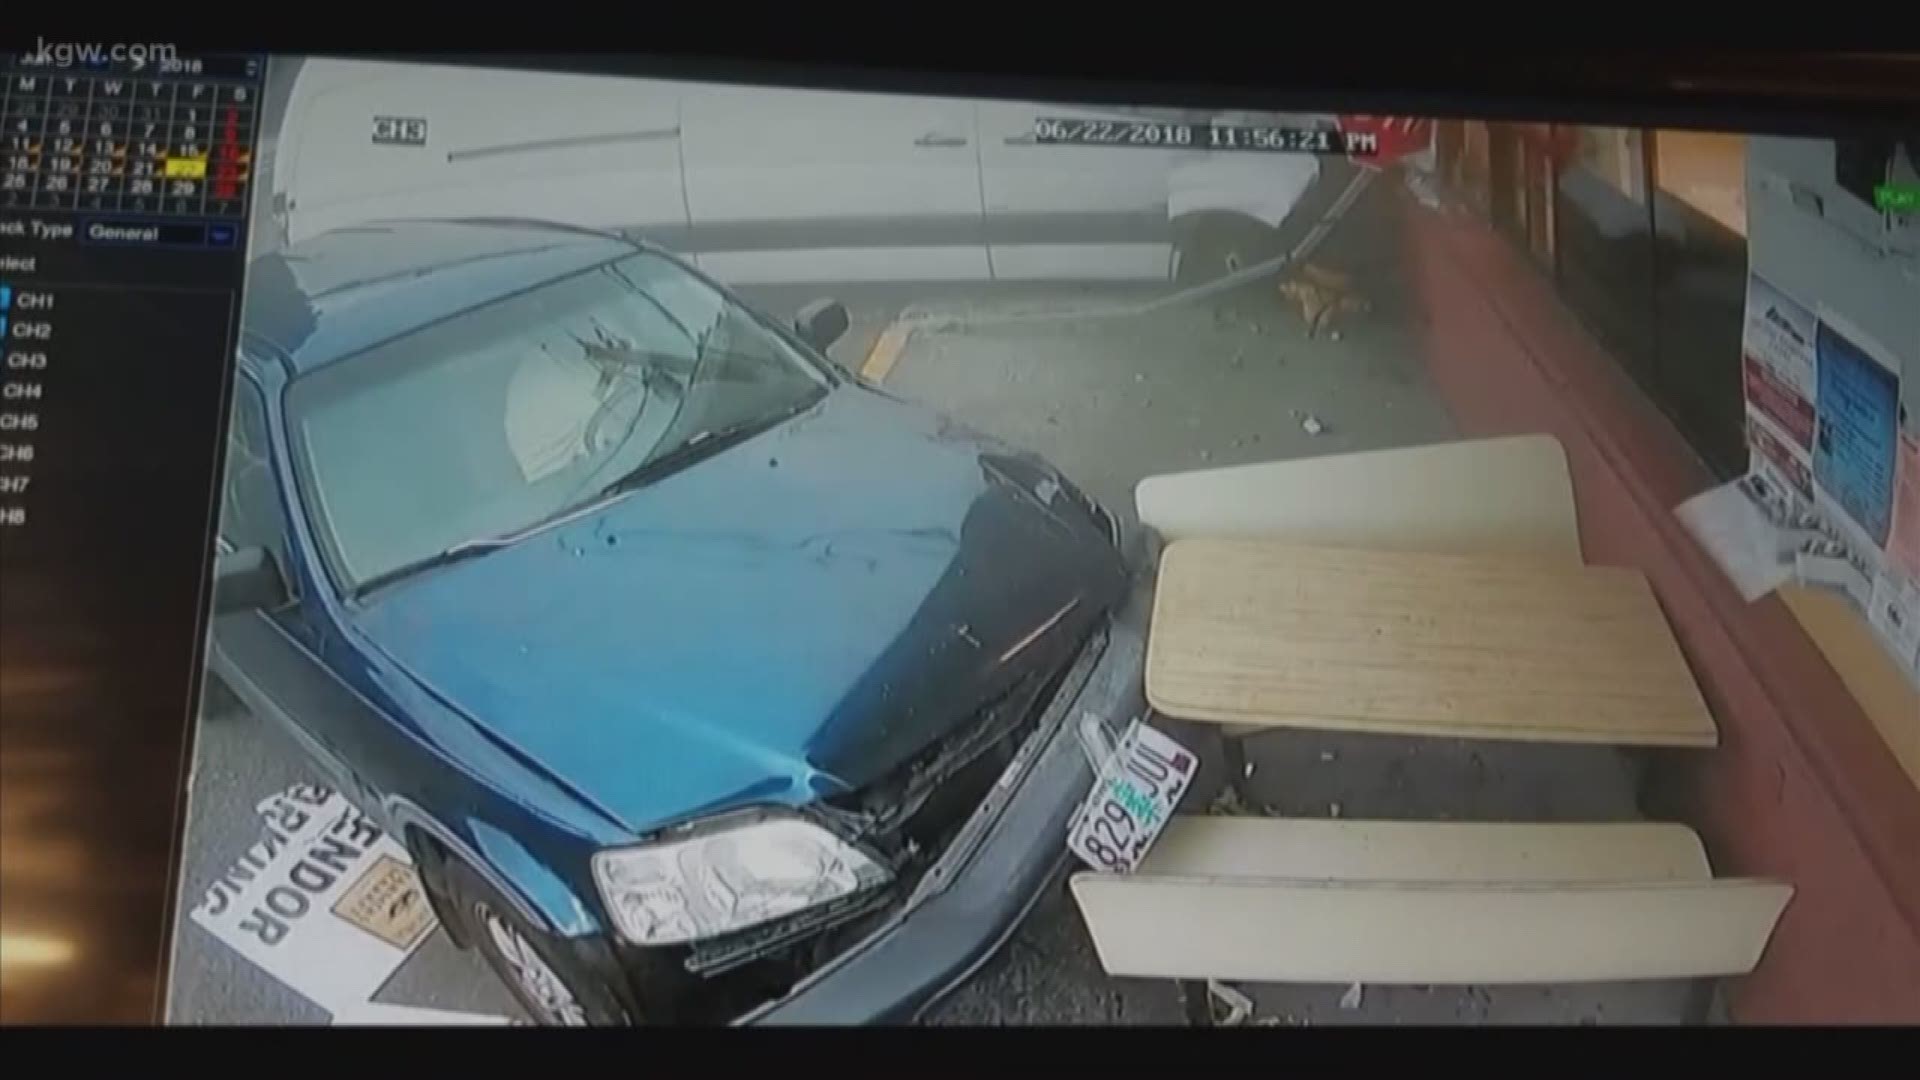 Video posted by Woodland police shows a van jump a curb and plow through a stopped car before smashing into the corner of the building.